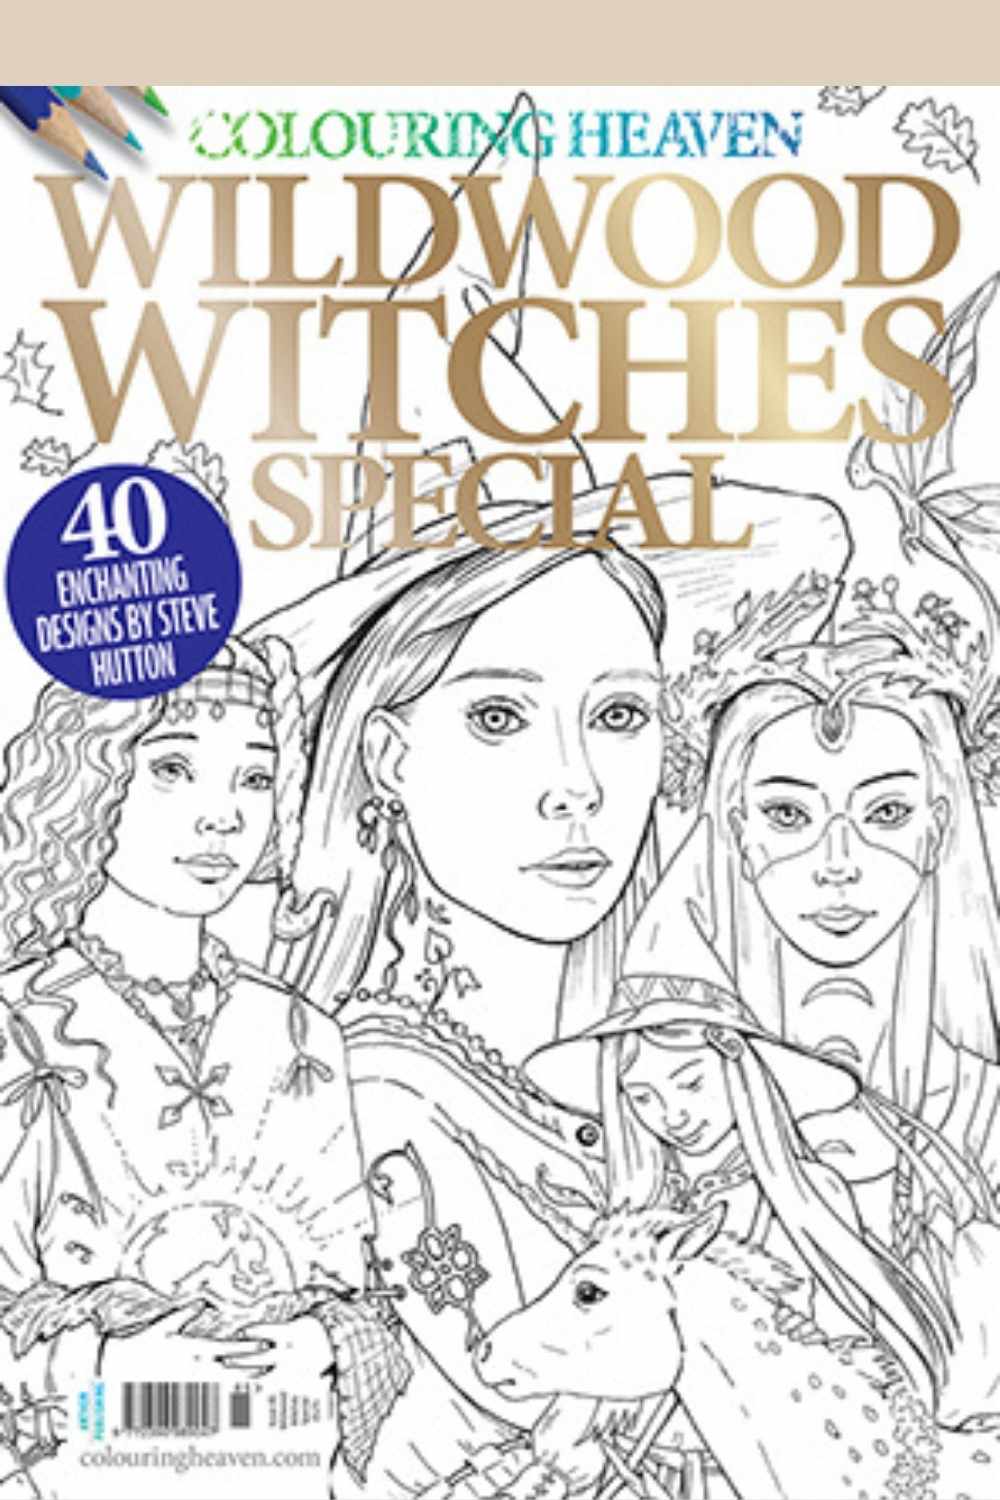 Colouring Heaven #85 Wildwood Witches Special